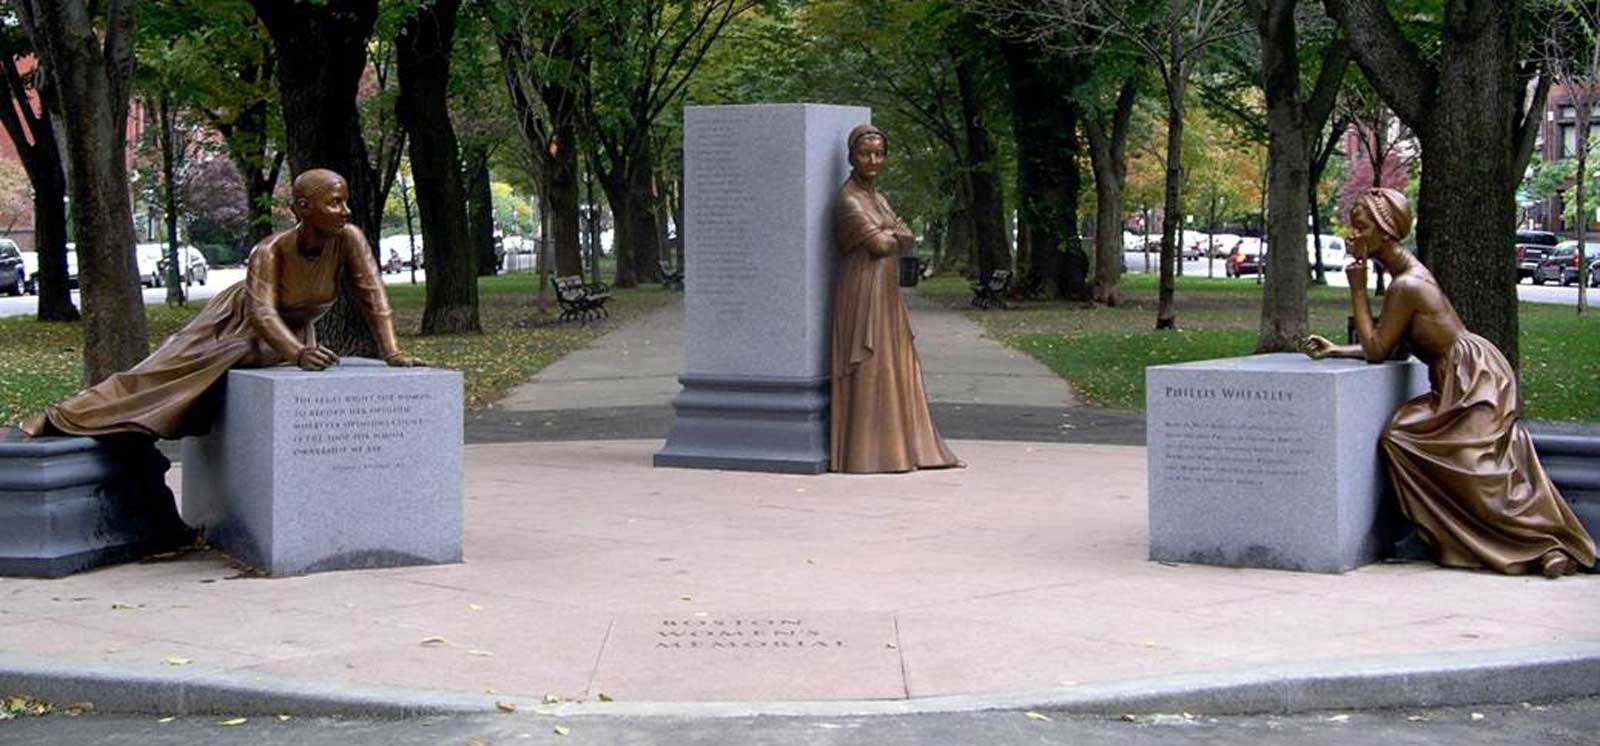 The Boston Women's Memorial includes statues honoring Abigail Adams, Lucy Stone, and Phillis Wheatley.